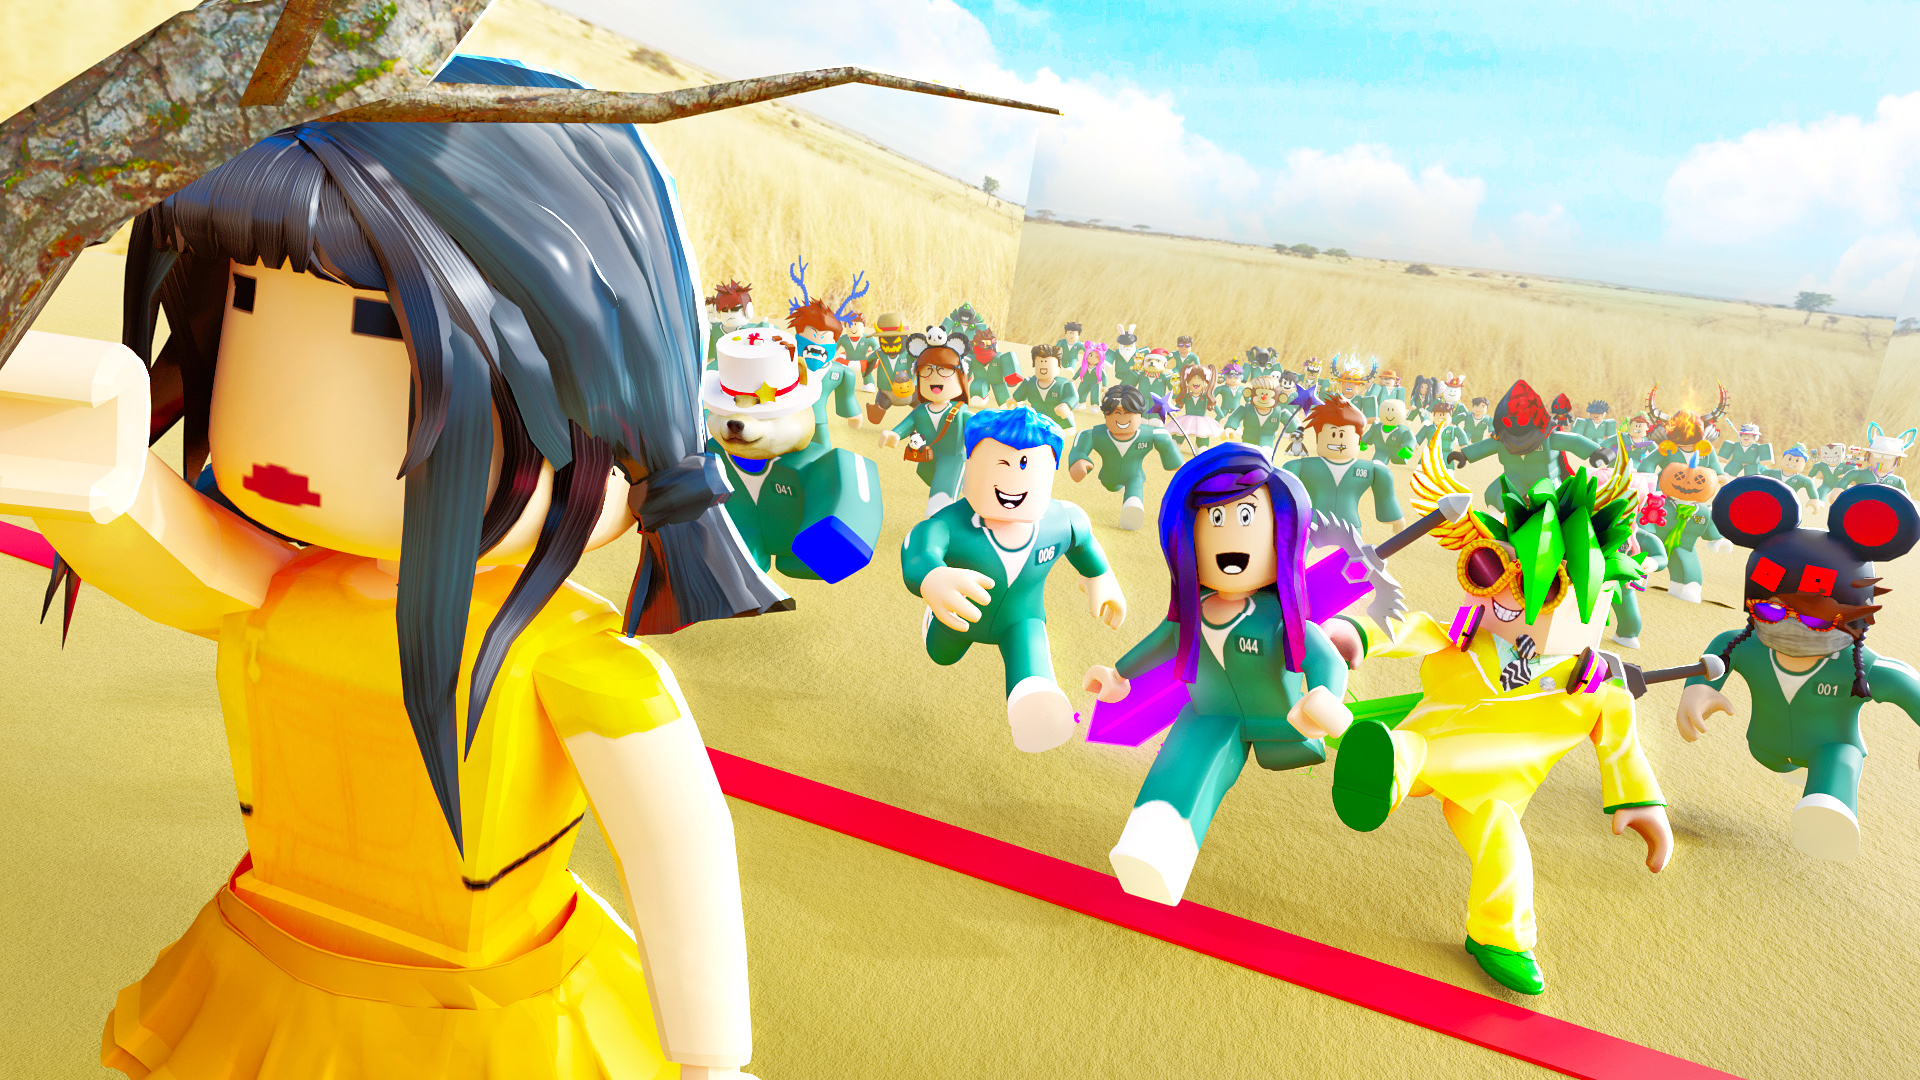 kingerman88 on X: @RobloxBattles Hosted a crazy Roblox r